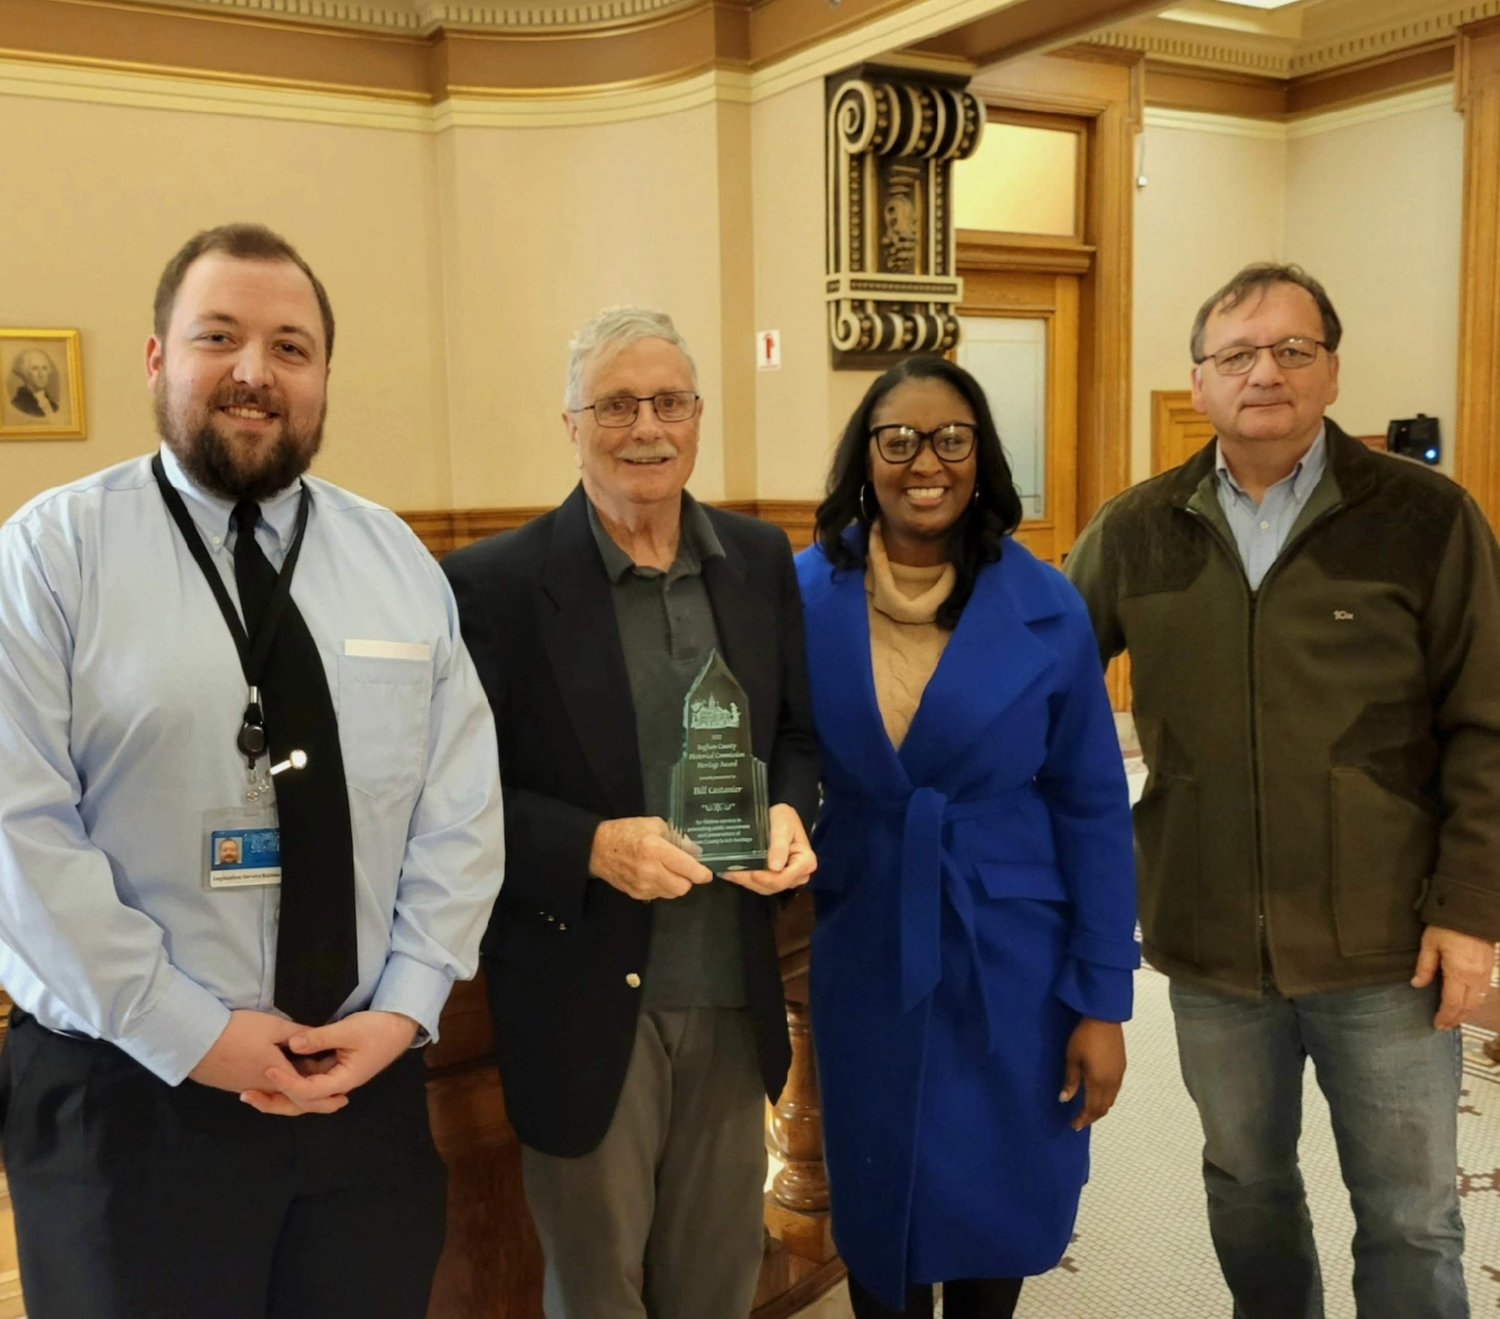 Bill Castanier, president of the Historical Society of Greater Lansing, after he received the Ingham County Heritage Award yesterday at the Ingham County Courthouse, in Mason. To his left is Jacob McCormick, who chairs the Ingham County Historical Commission and is a Historical Society trustee. State Rep. Sarah Anthony and Jesse Lasorda, a former Historical Society trustee and the commission's former vice chair, are to his right.